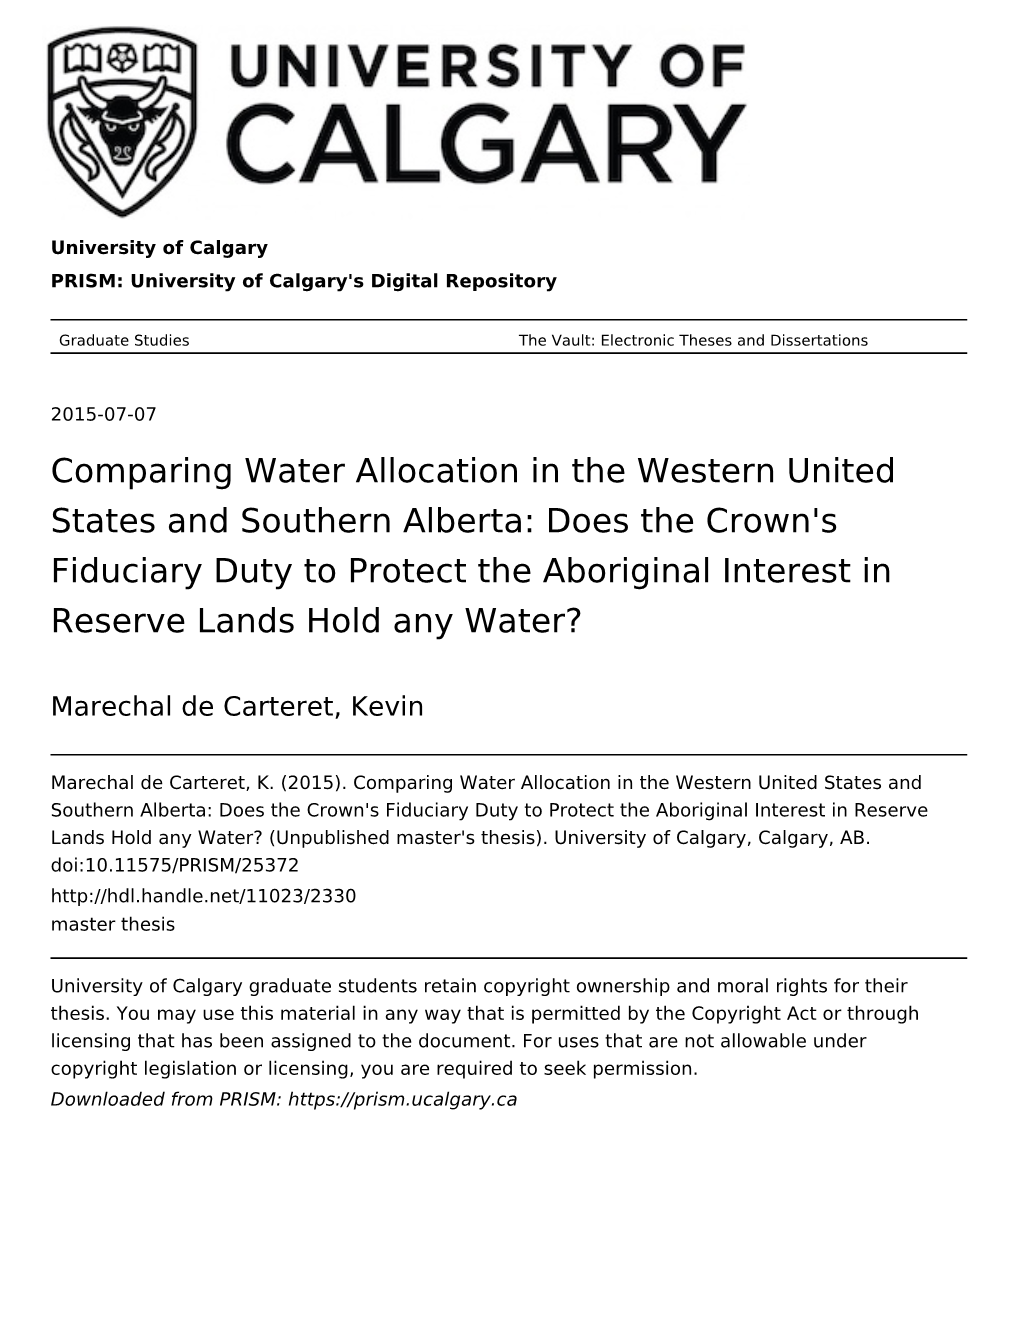 Comparing Water Allocation in The